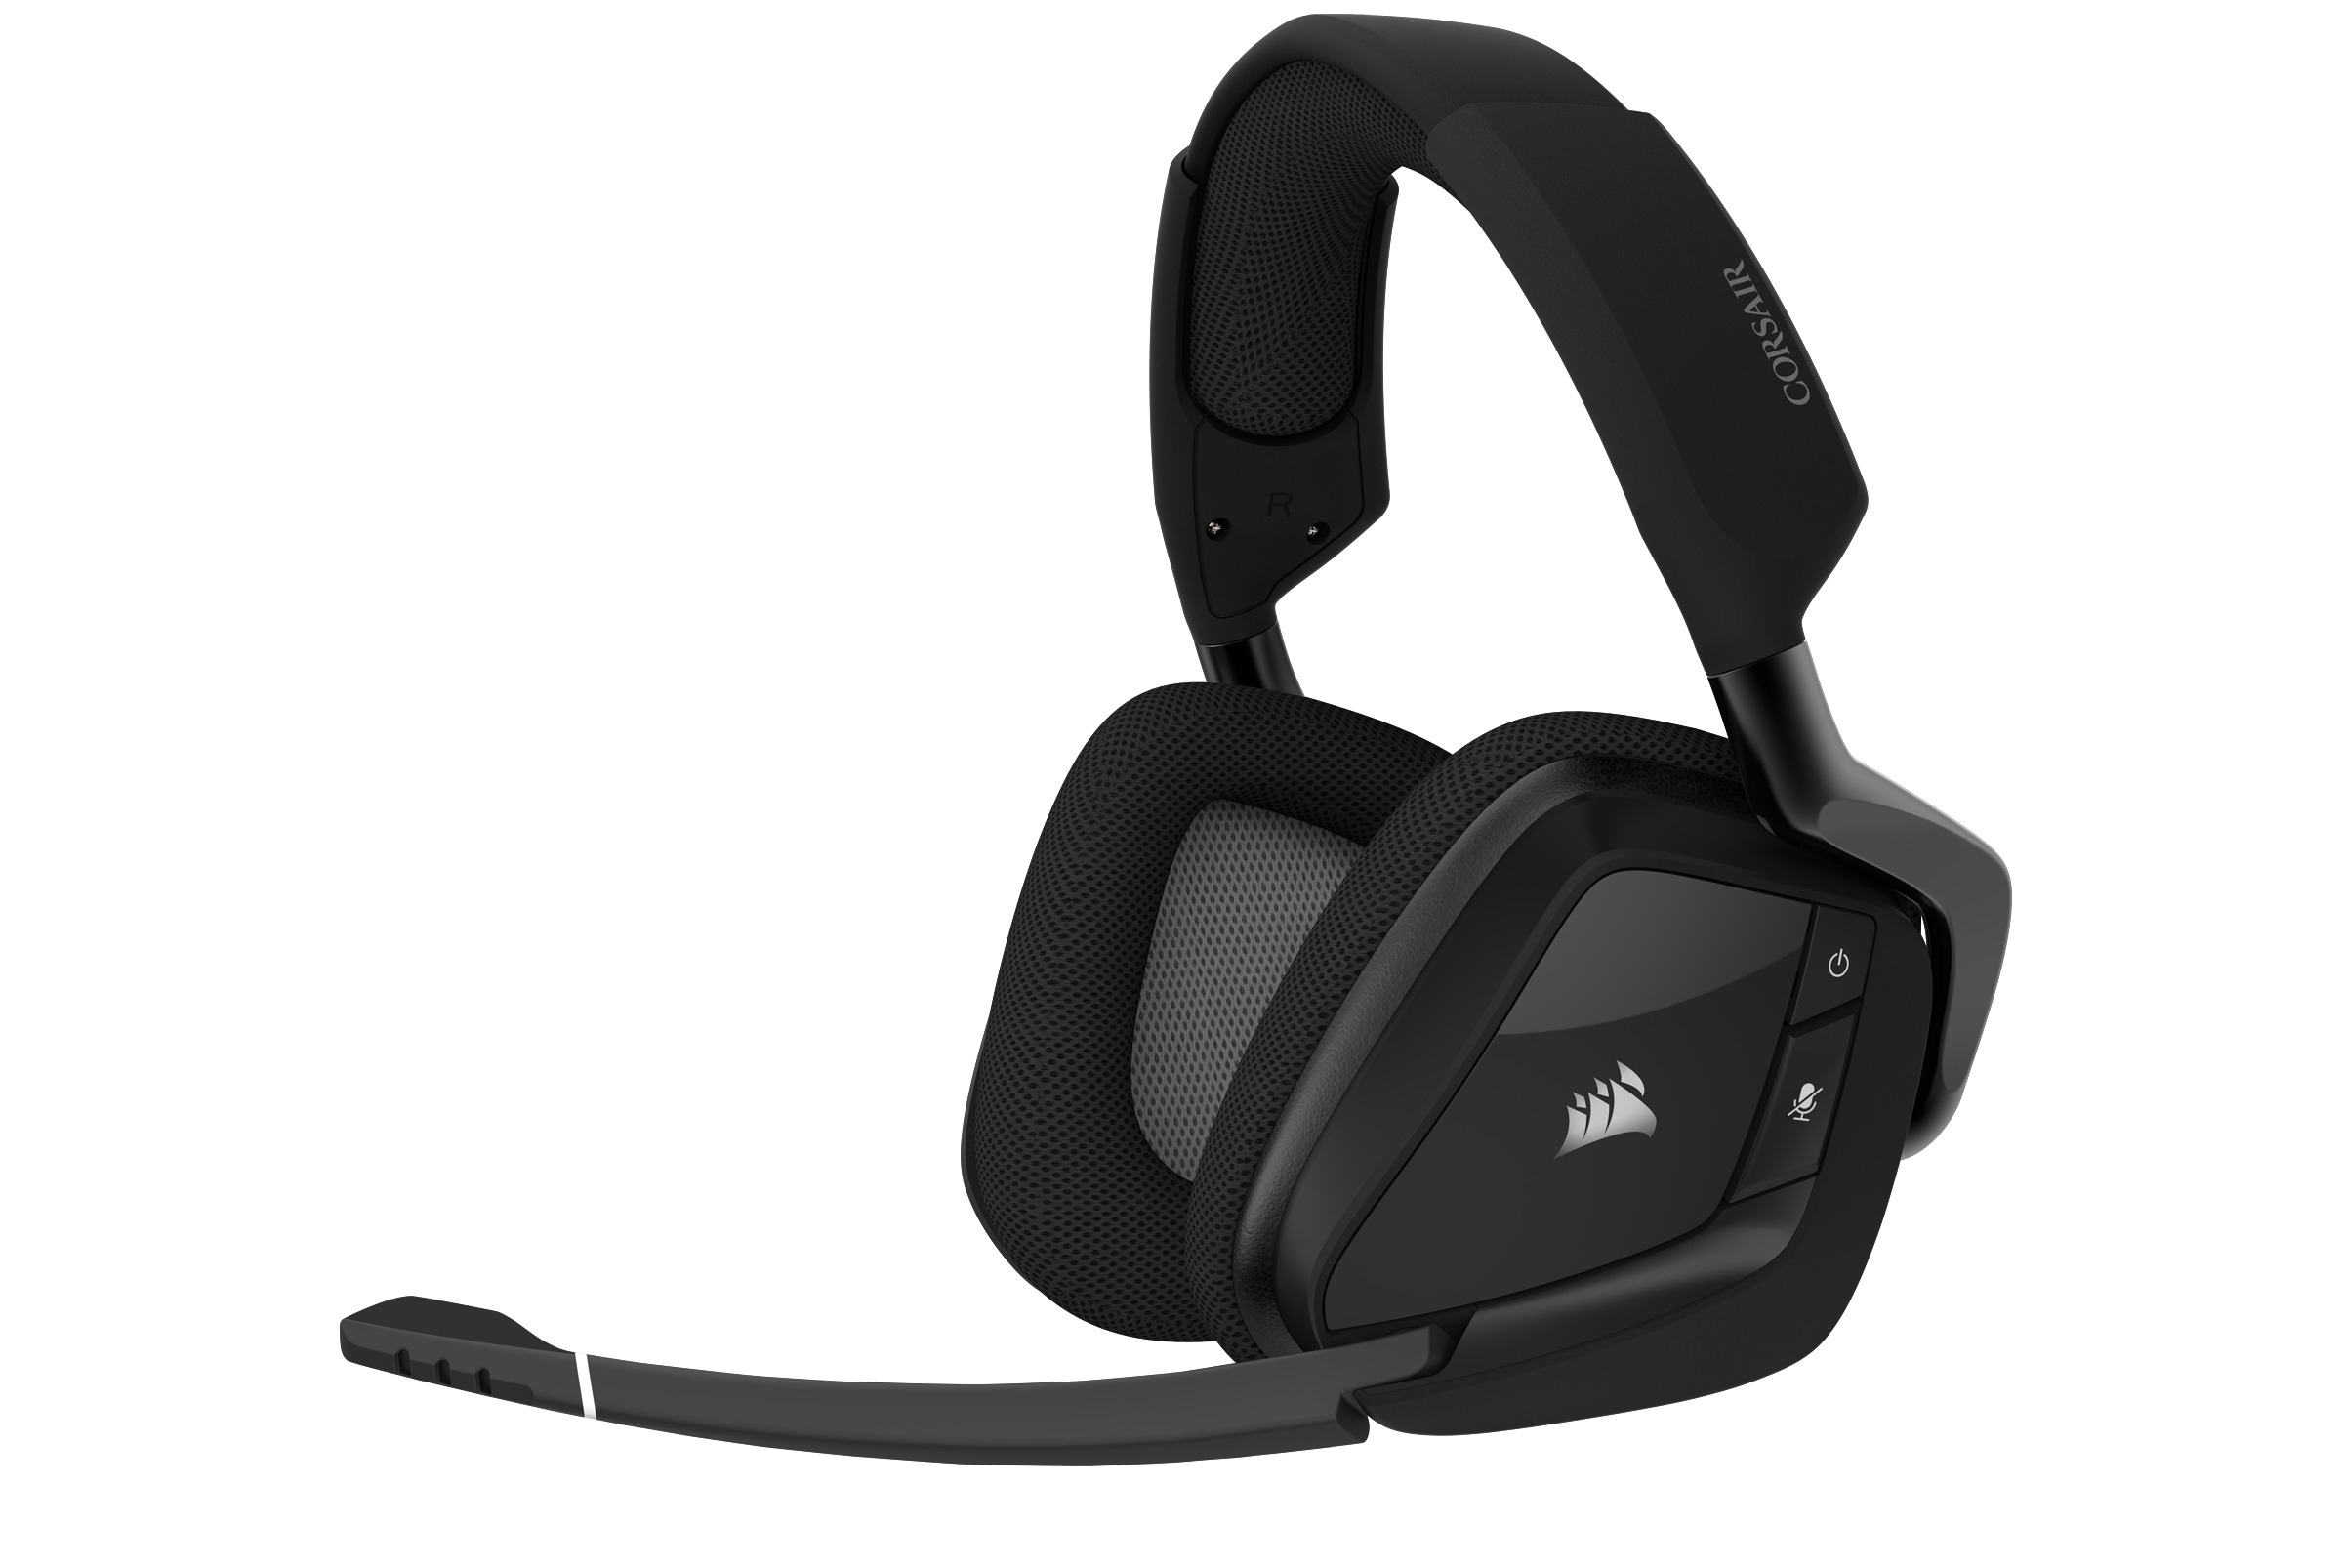 CORSAIR CA-9011201, Gaming Carbon Over-ear Headset